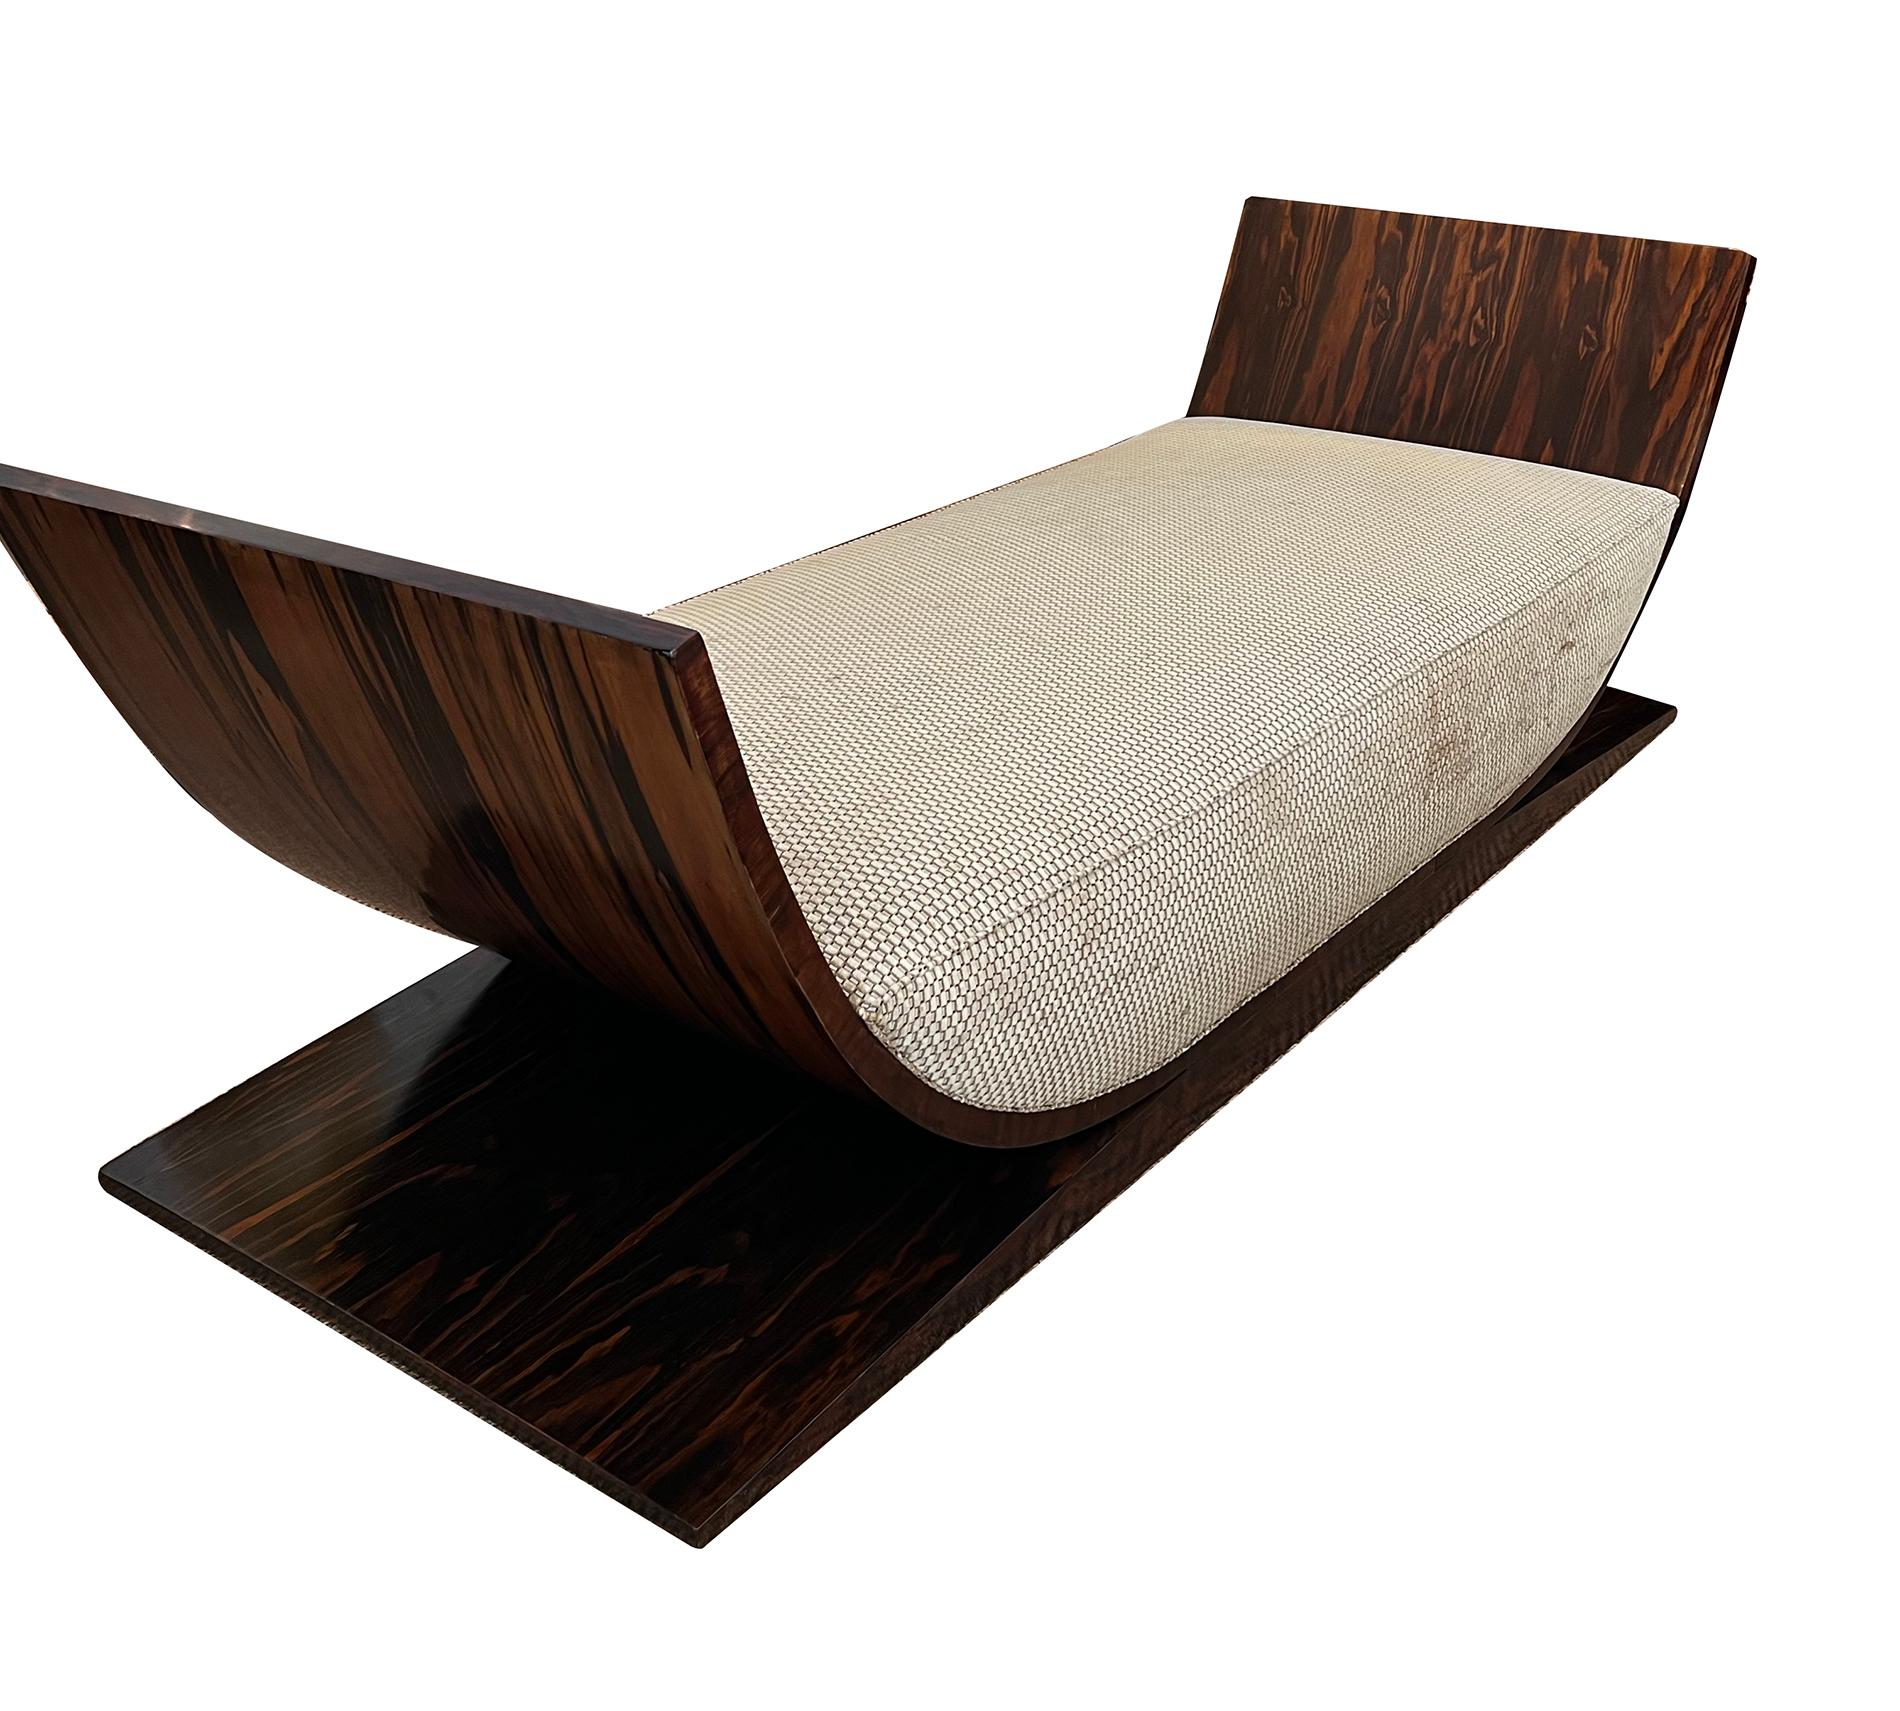 A Sleek French Art Deco Macassar Ebony Gondola Daybed  In Good Condition For Sale In San Francisco, CA